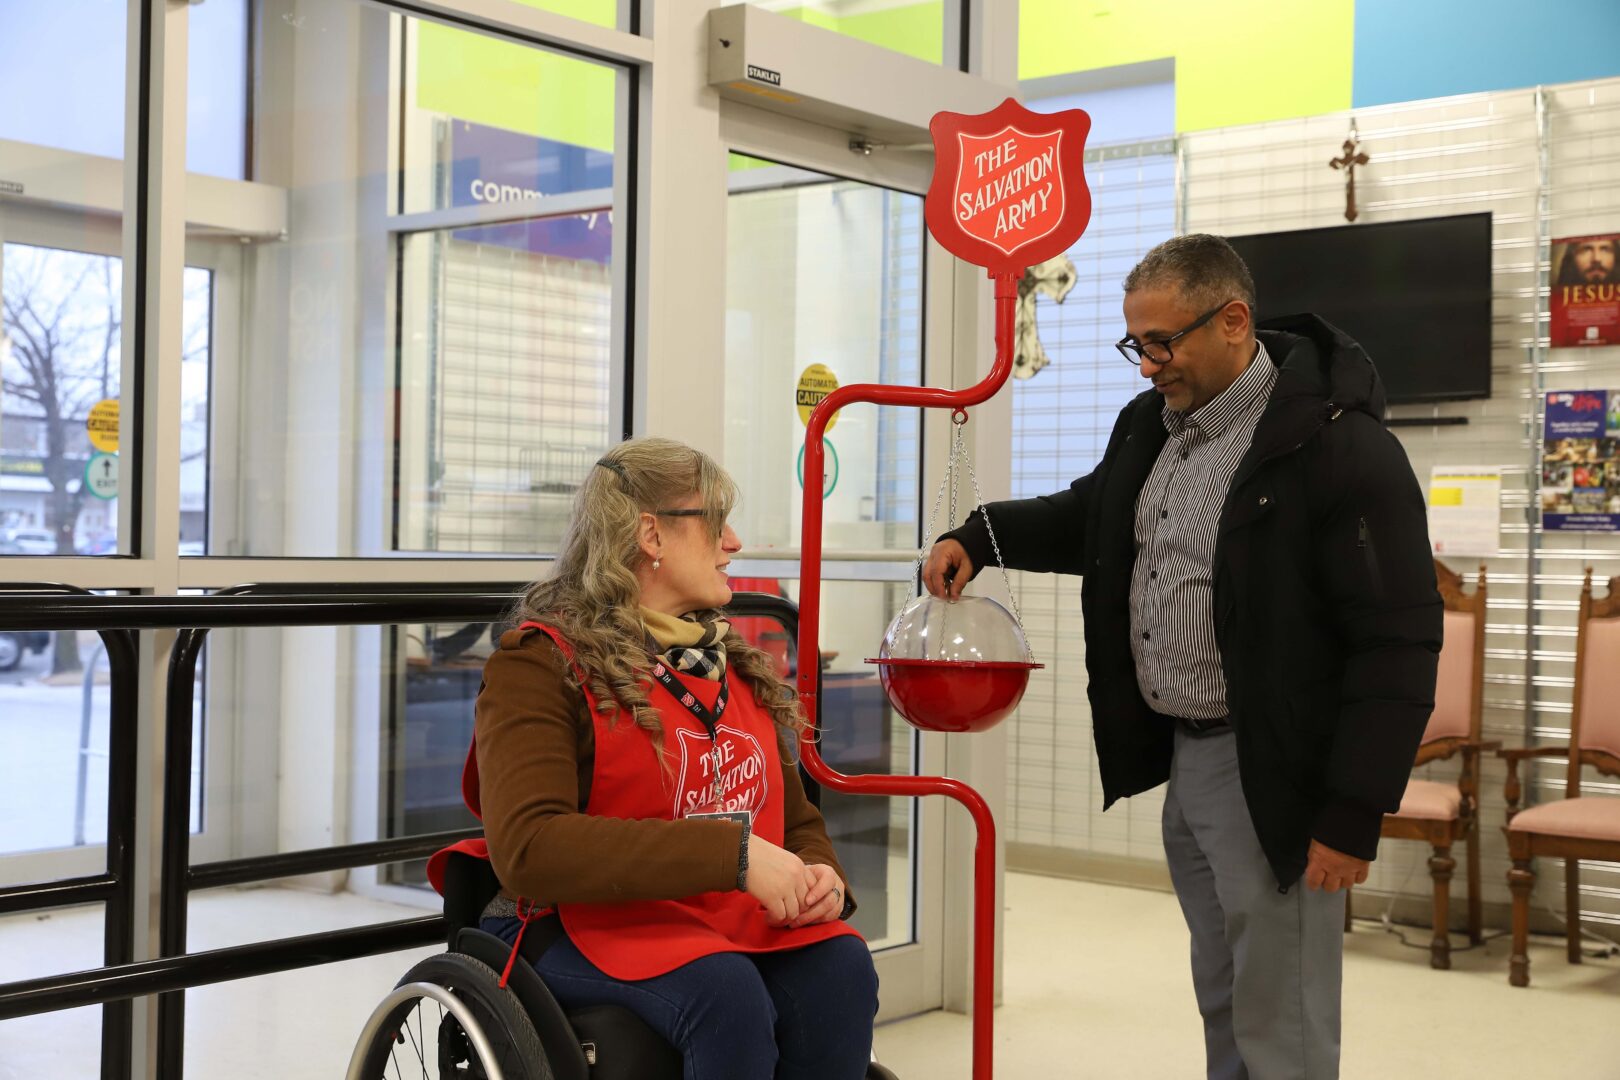 A Salvation Army volunteer in wheelchair smiles at individual donating to kettle inside a shop.